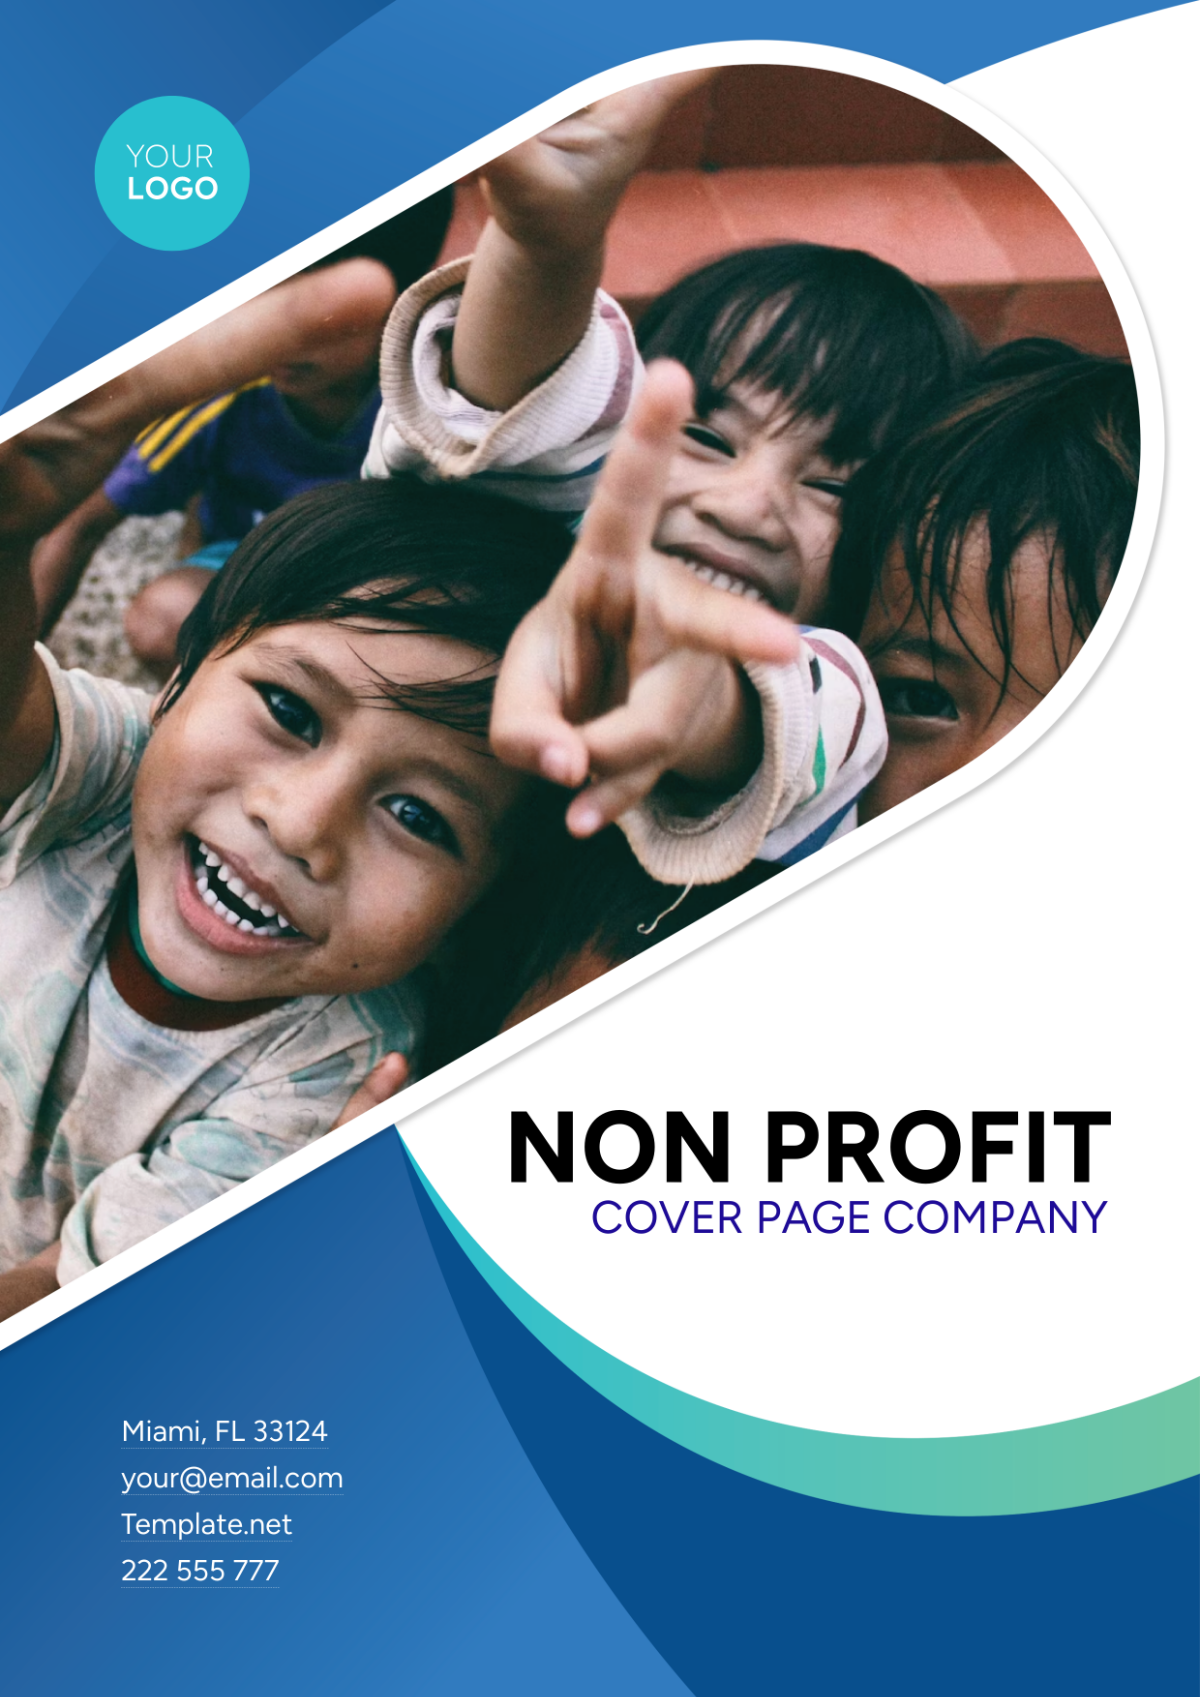 Nonprofit Cover Page Company Template